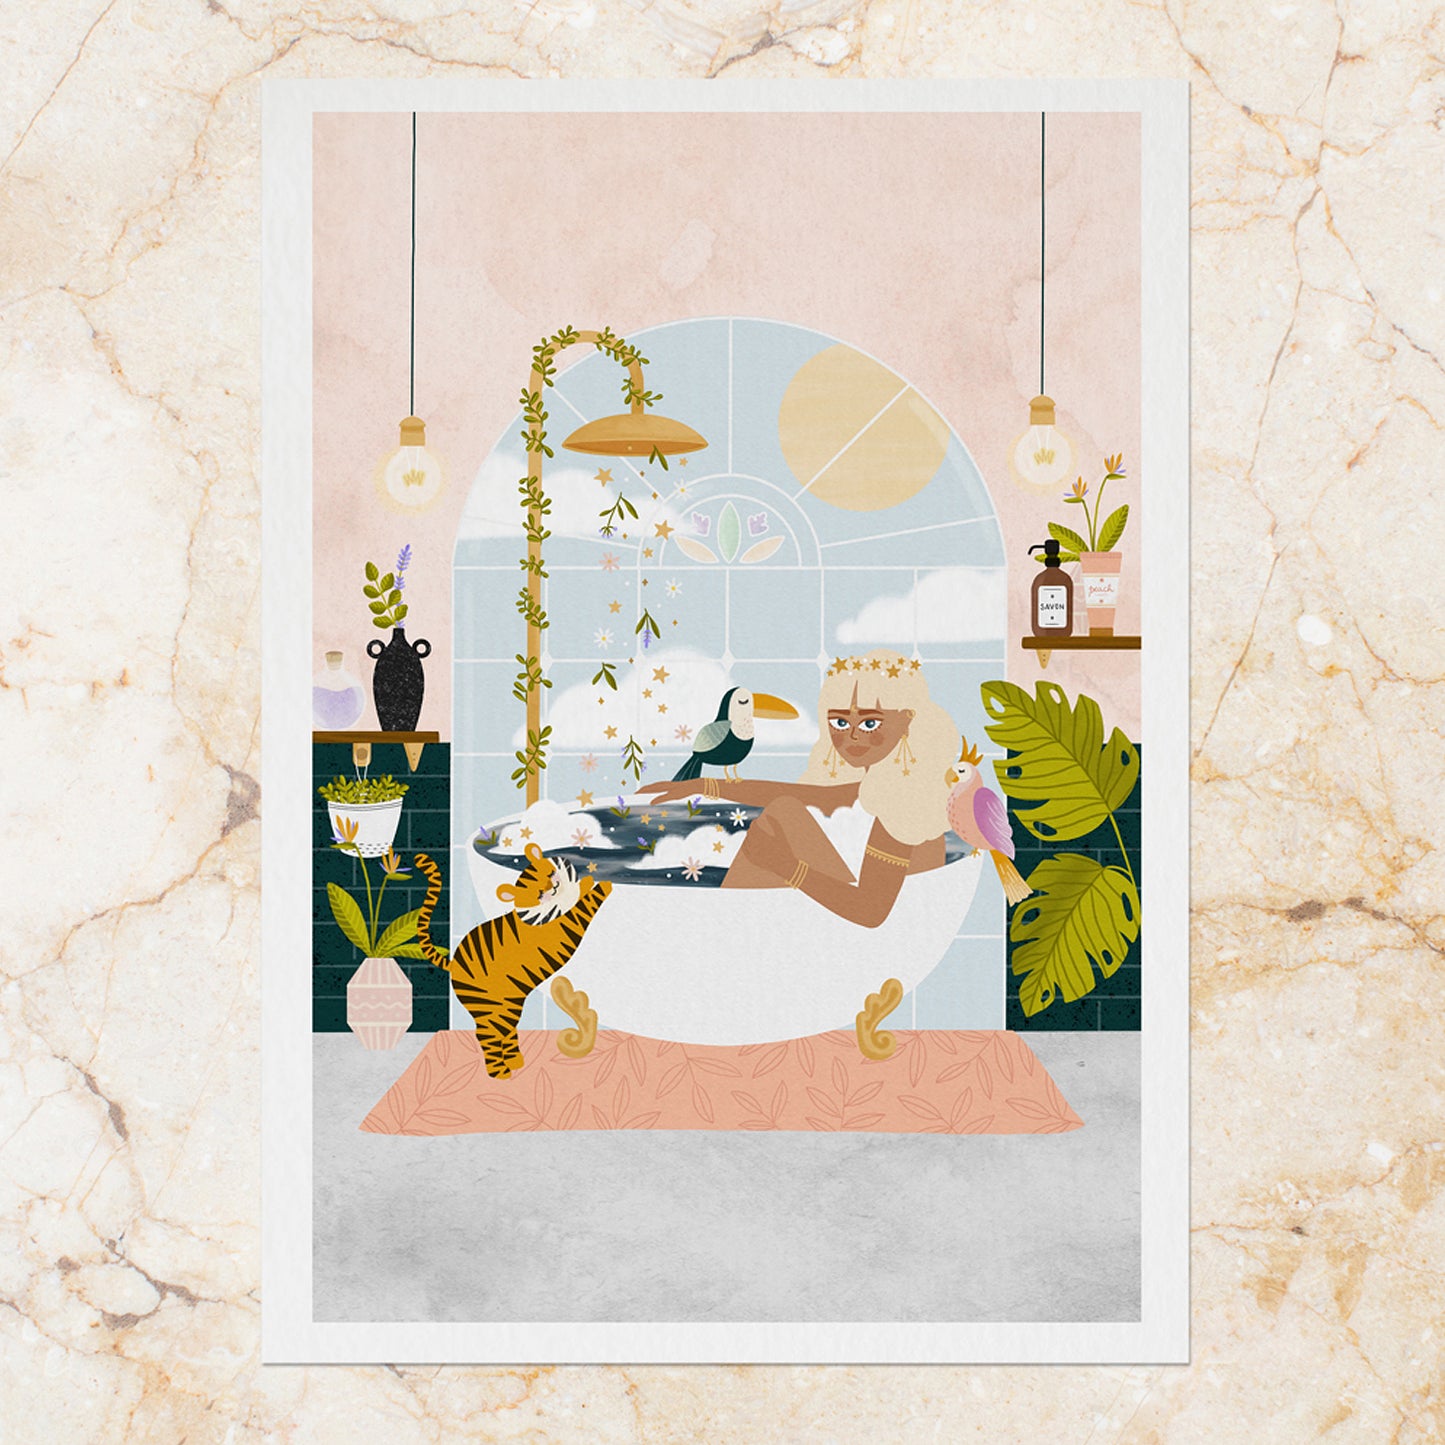 Affiche / Poster A4 • Illustration « Relaxing Bath »